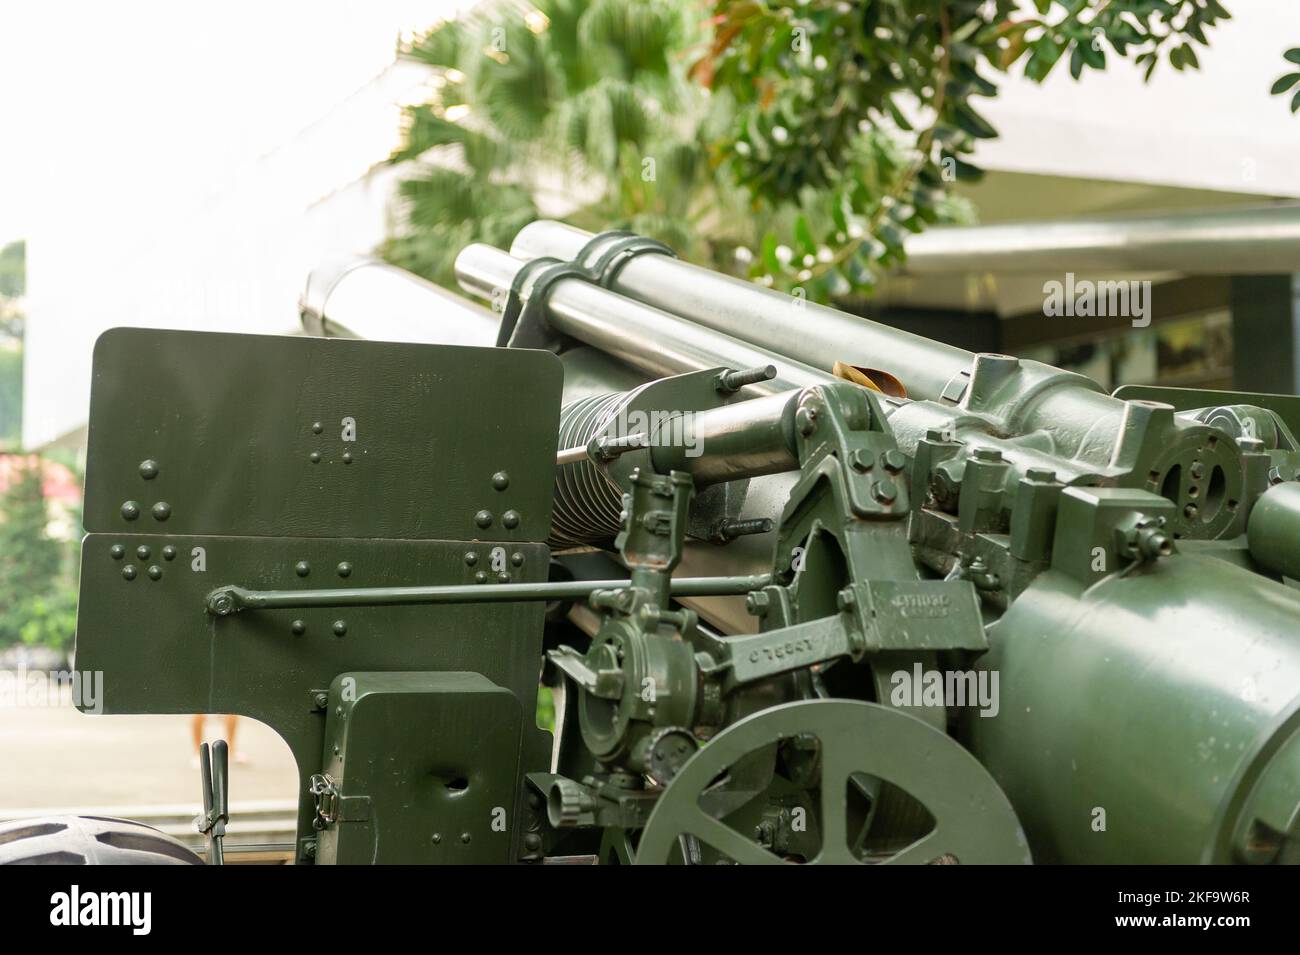 US Army M114 155 mm howitzer at the War Remnants Museum, Ho Chi Minh City, Vietnam Stock Photo